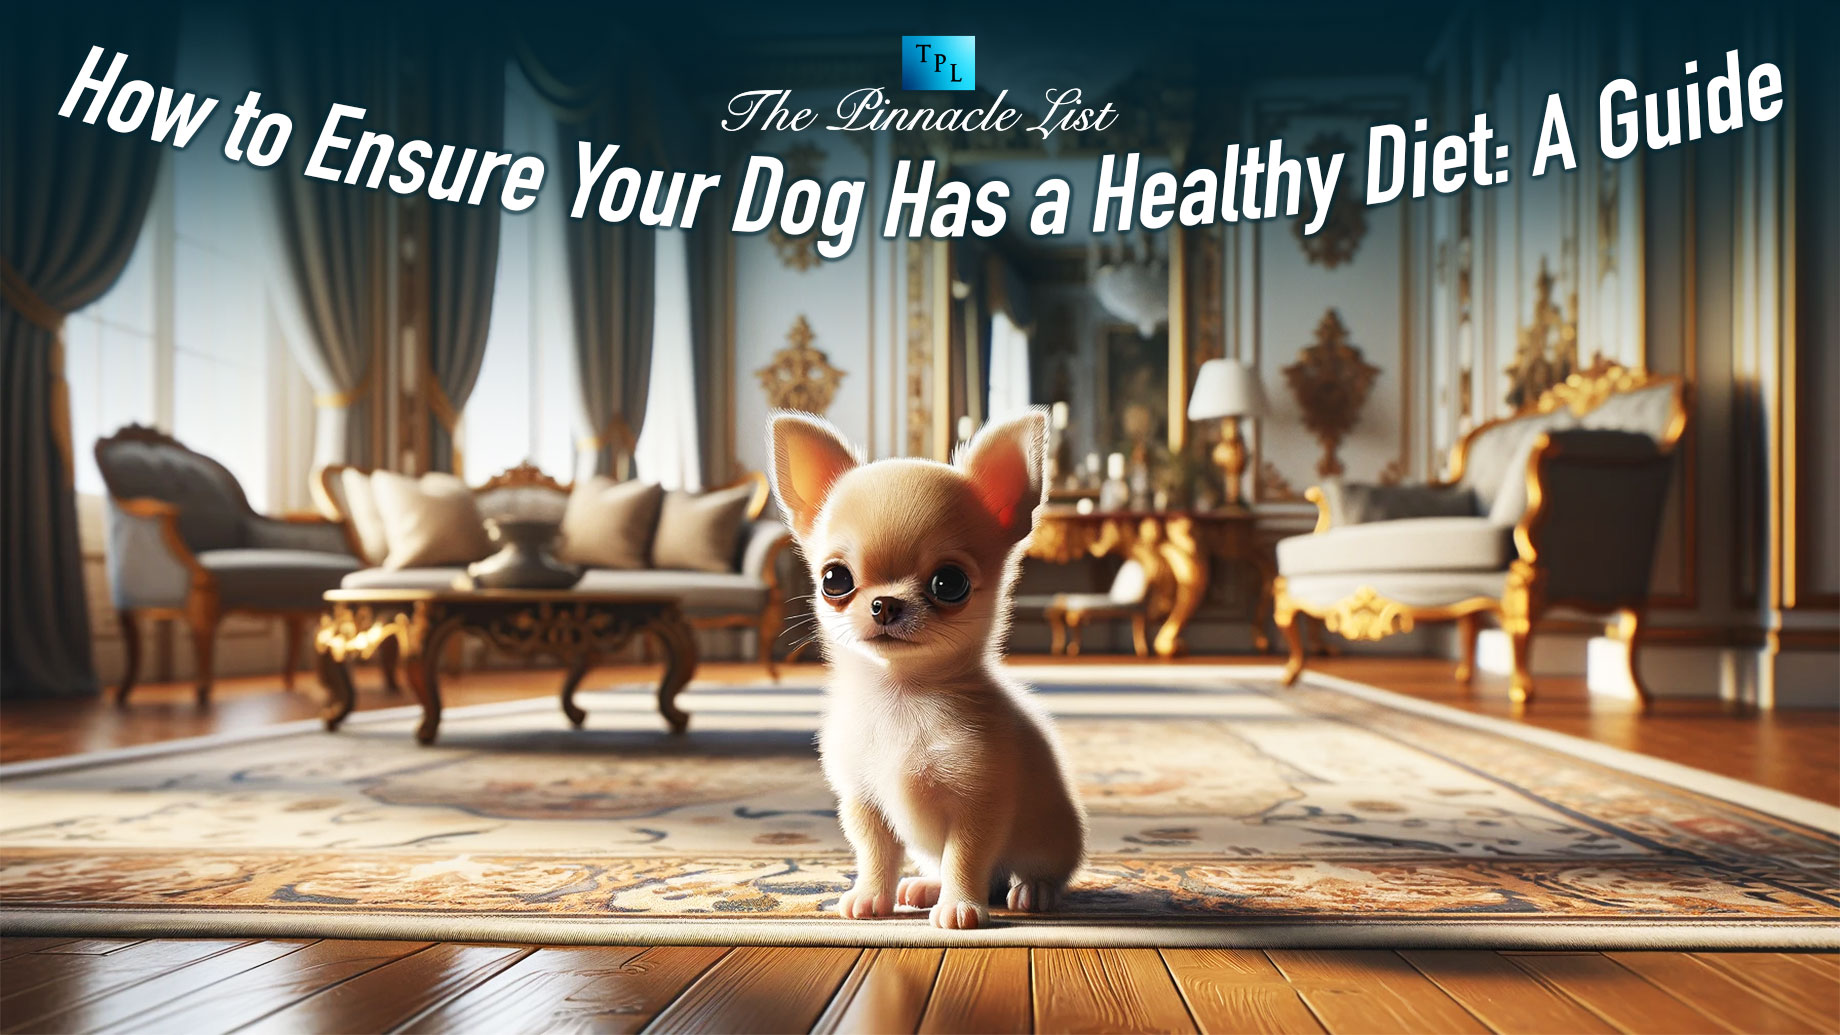 How to Ensure Your Dog Has a Healthy Diet: A Guide